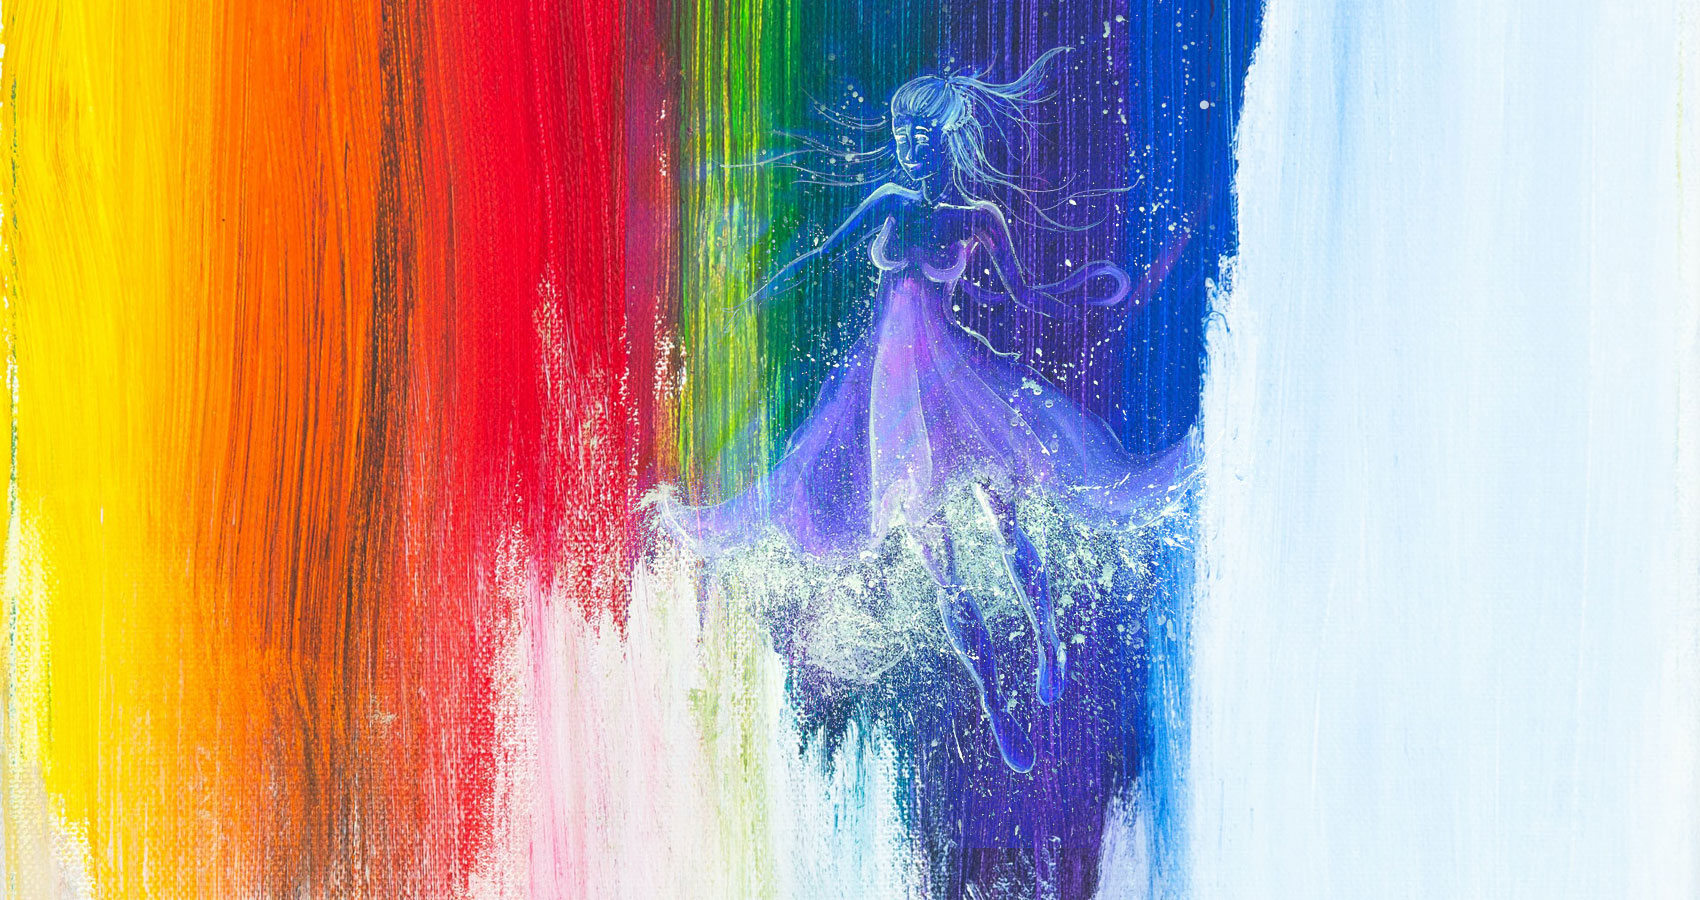 The Rainbow Princess, a children's story by Nina Taylor at Spillwords.com